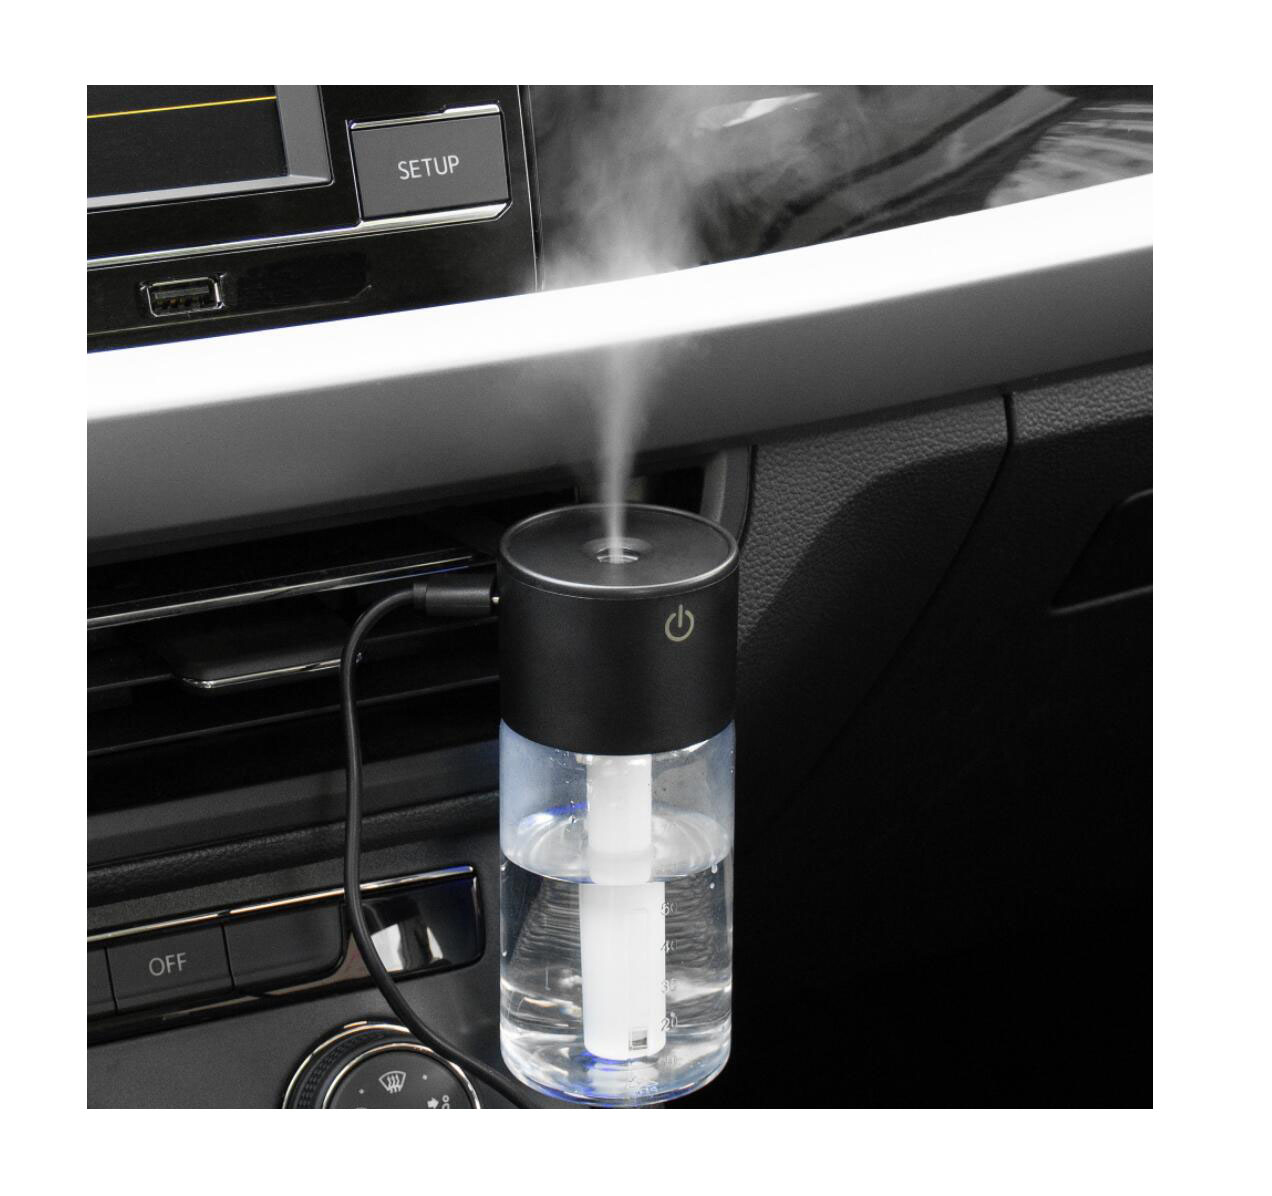 FYS-BN01 Mini Car Air Humidifier Aroma Essential Oil Diffuser for Office, Home, Car, Personal Use 